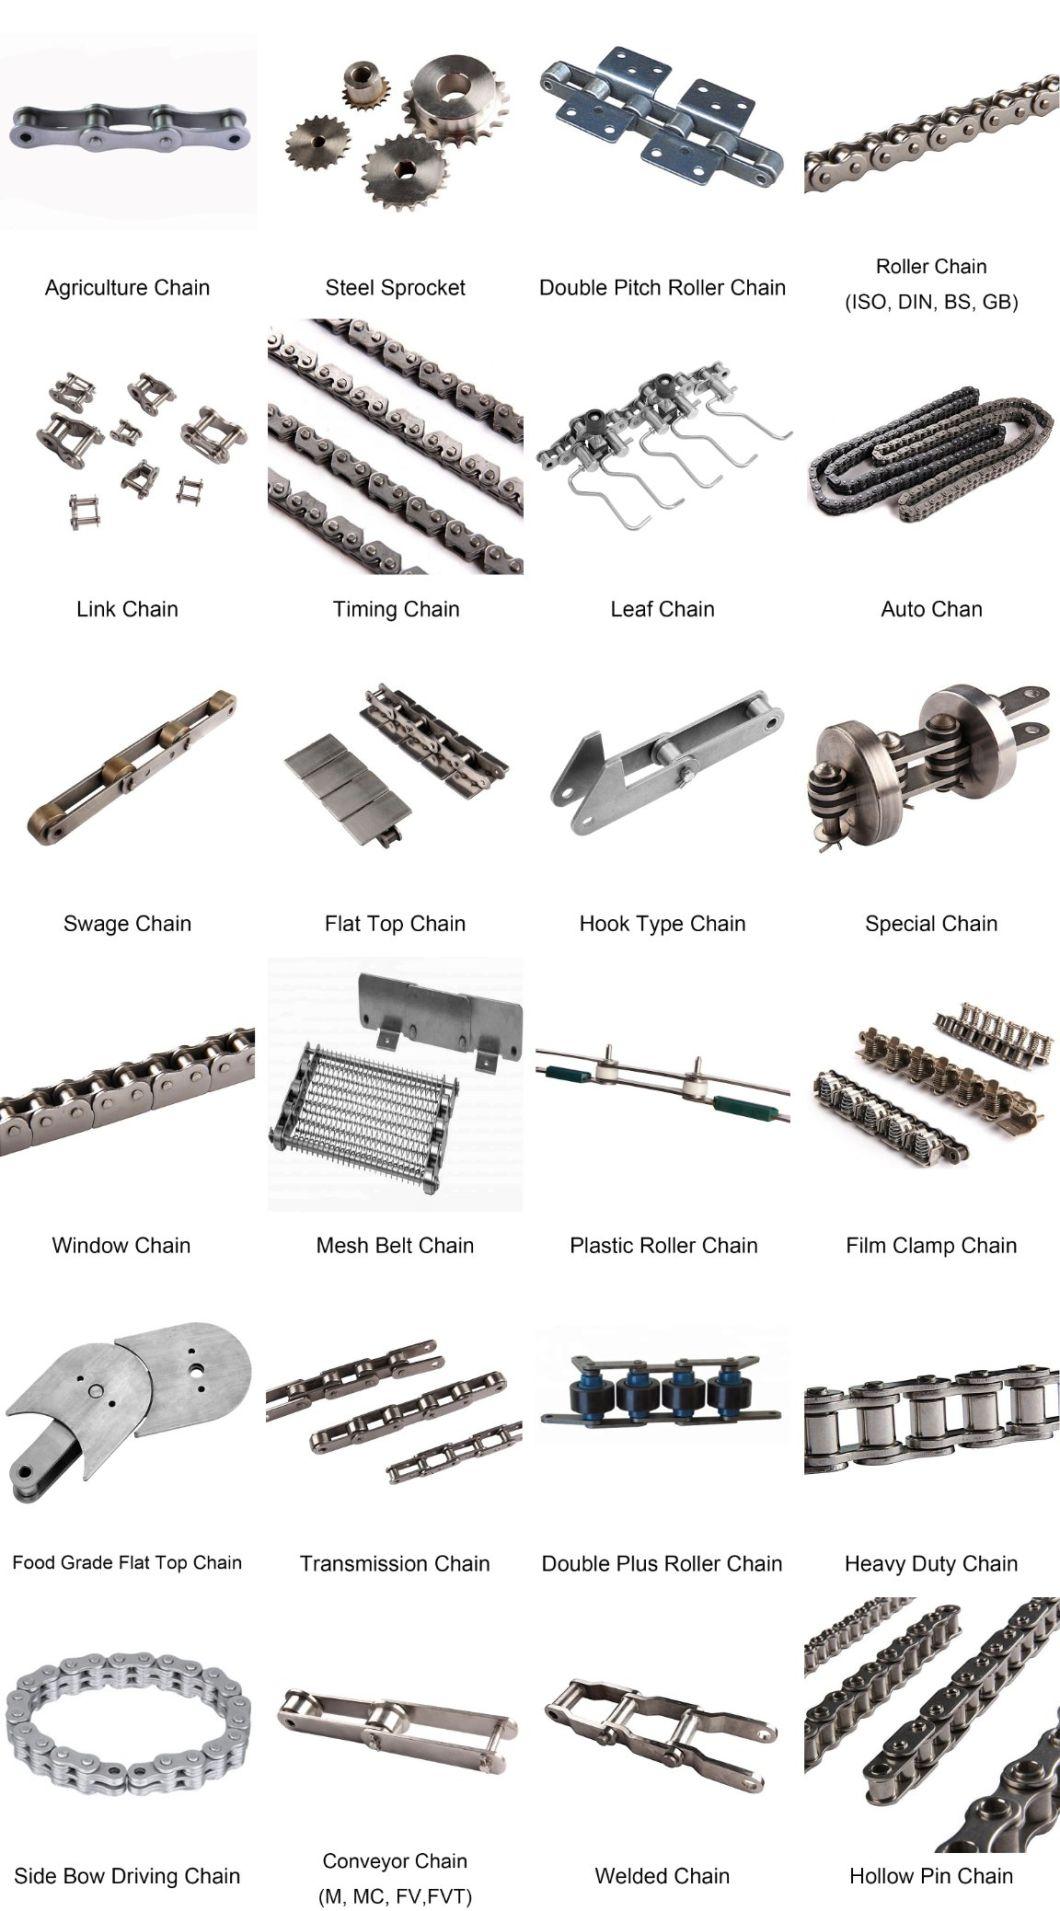 High Temperature Wear Resistant Chain Welded Roller Chains with Attachments